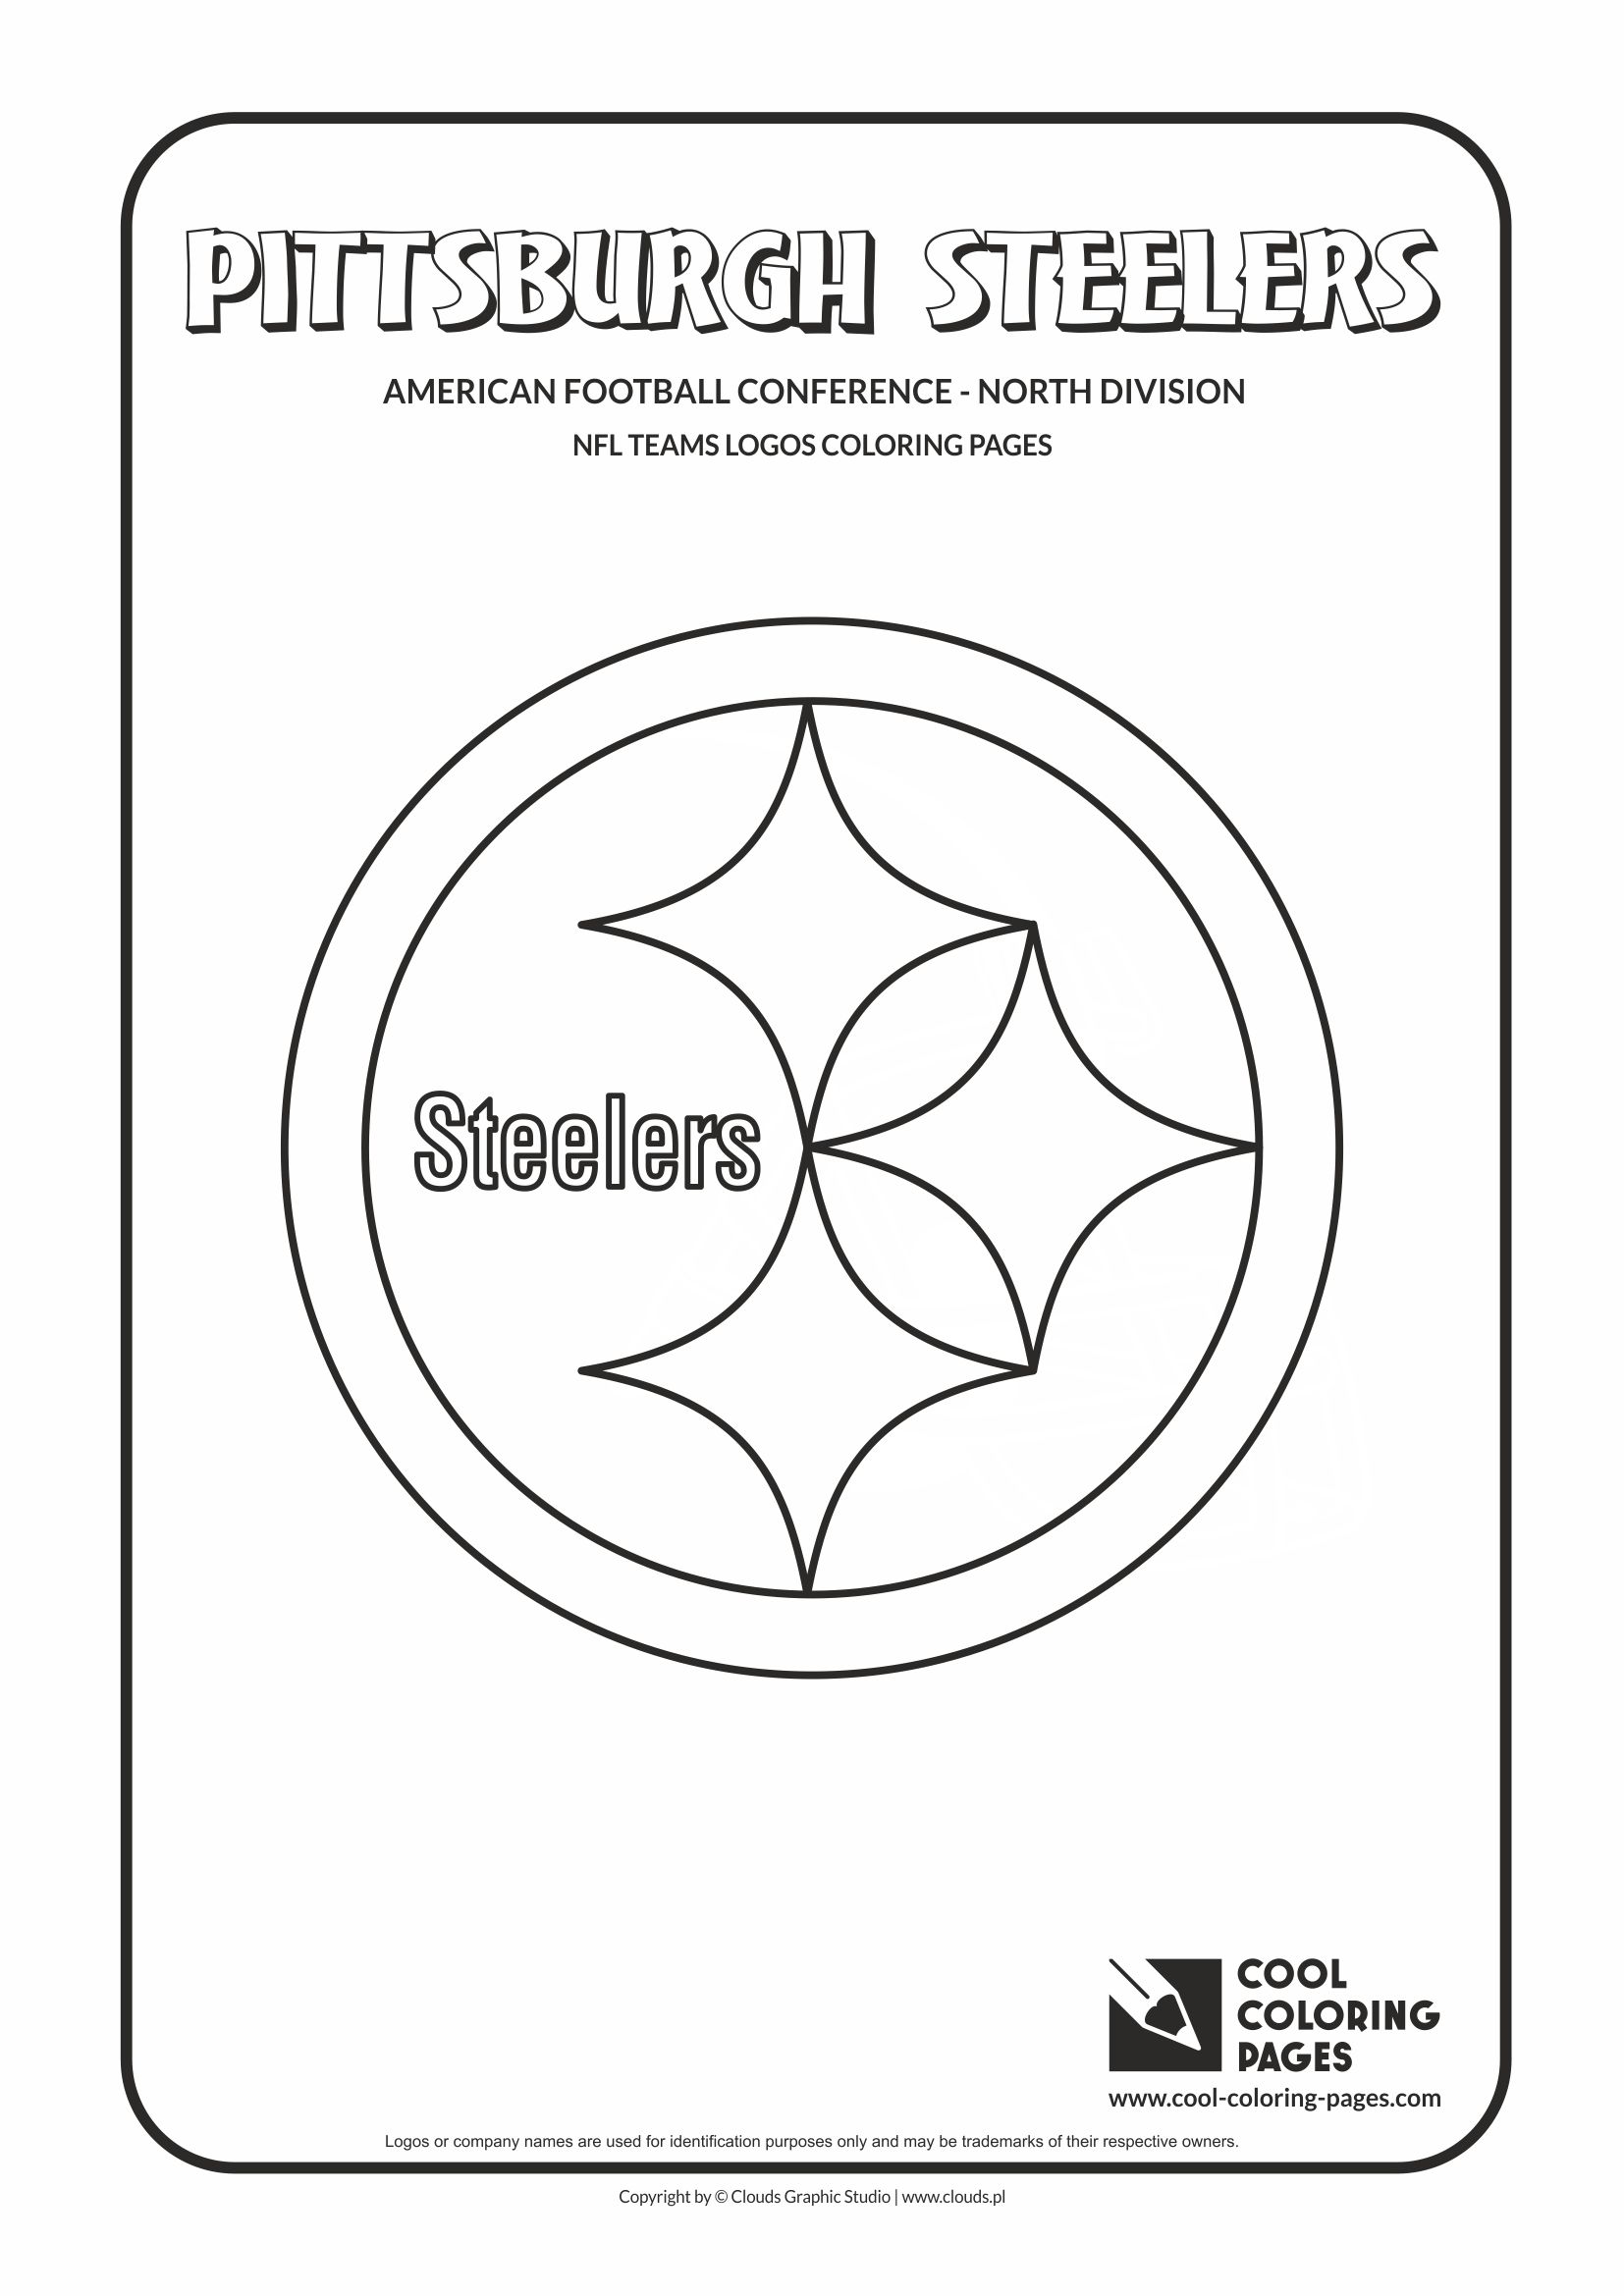 Cool Coloring Pages NFL teams logos coloring pages Cool Coloring